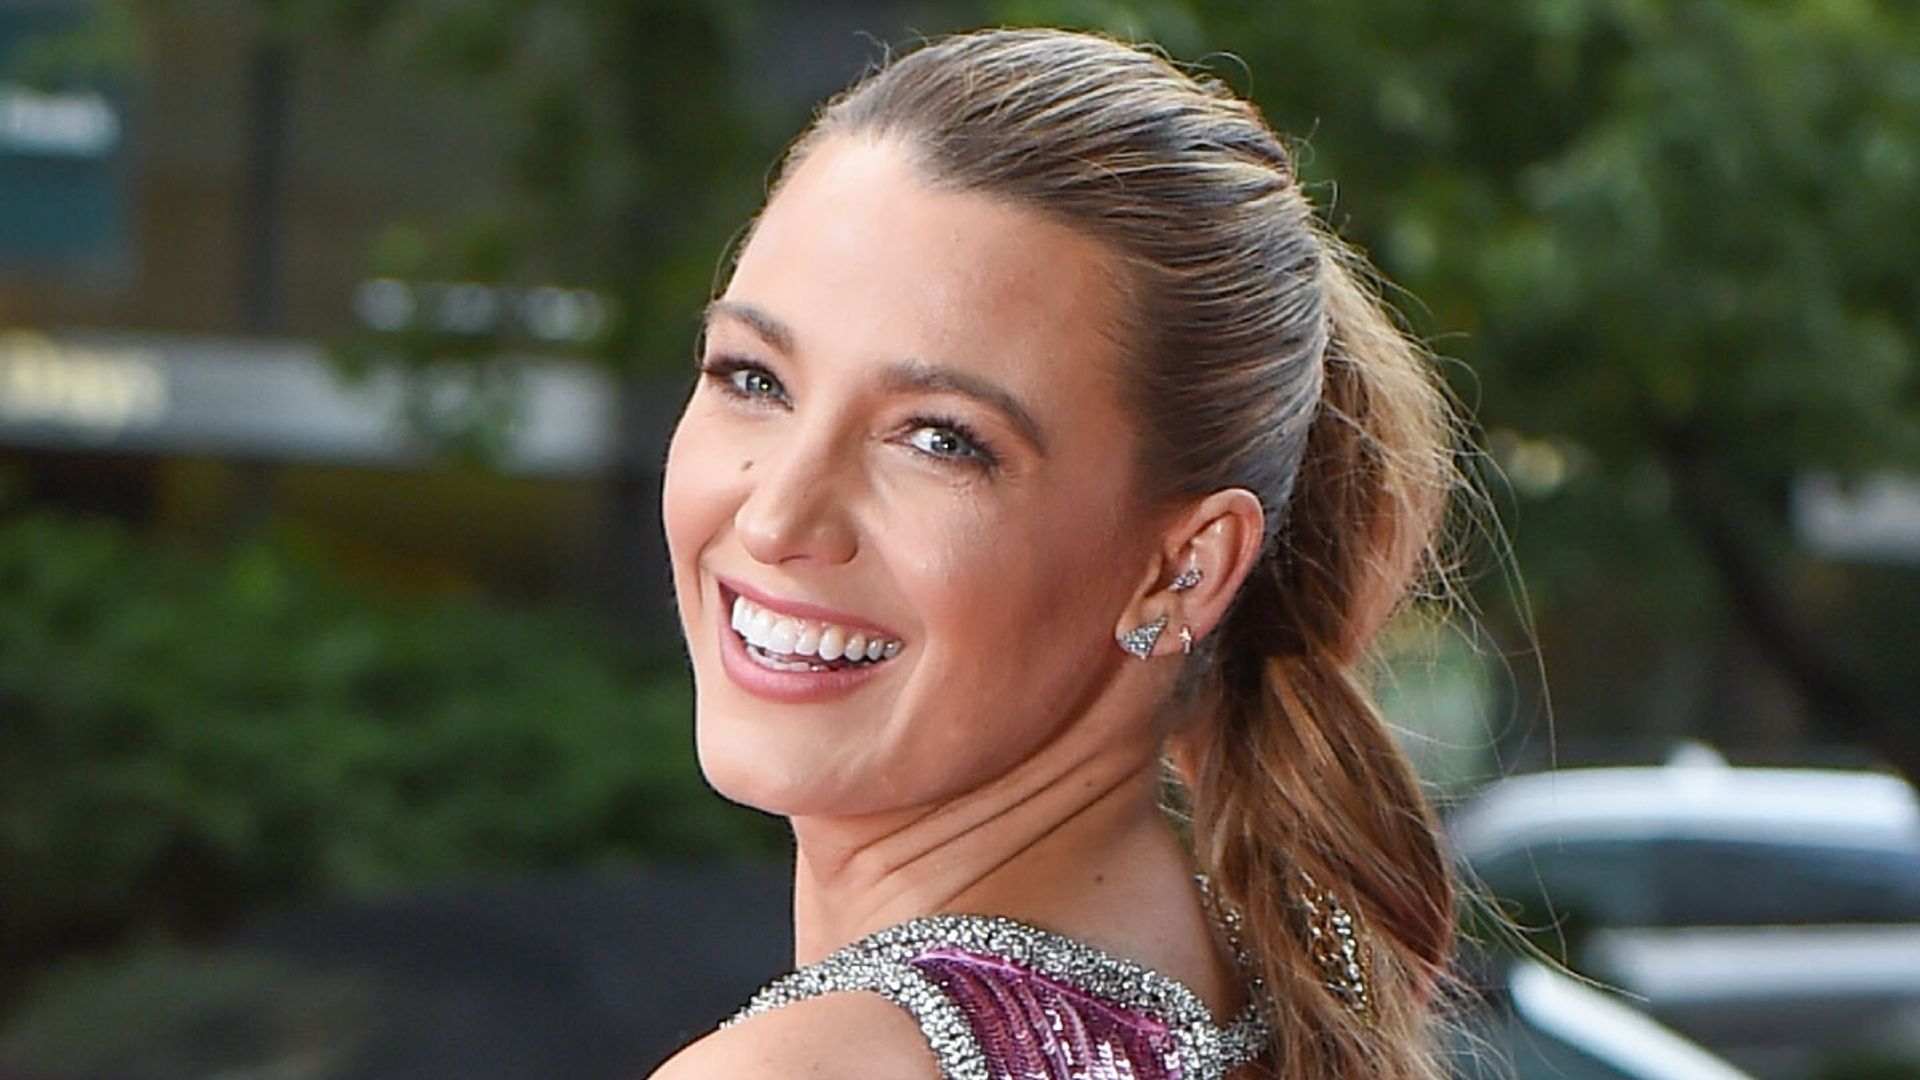 Blake Lively goes brunette as new 'It Ends With Us' role announced